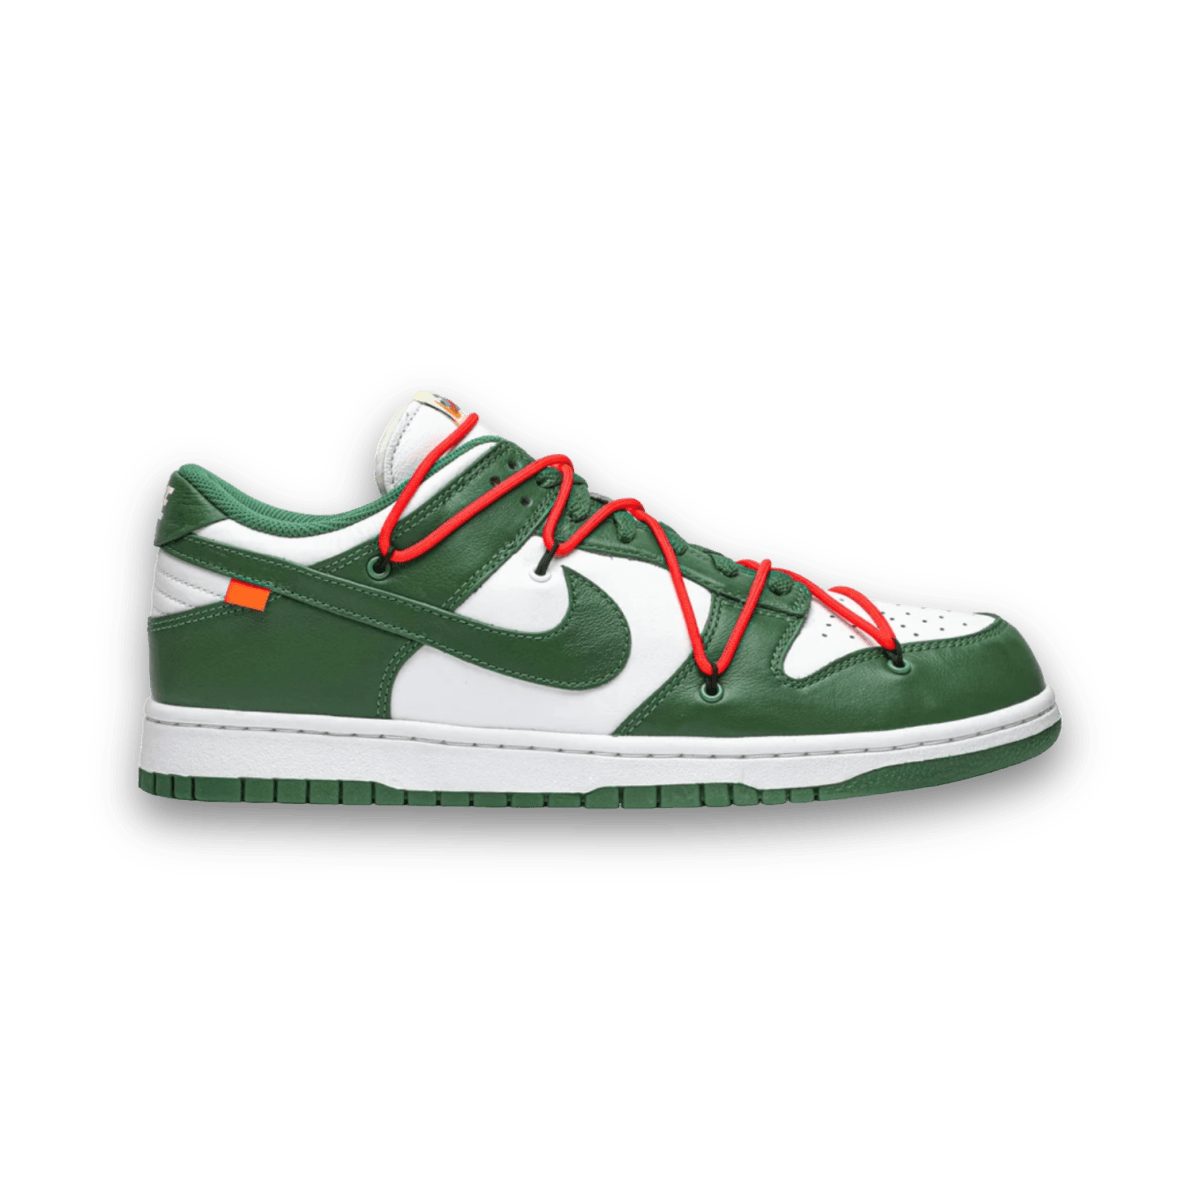 Off-White x Dunk Low Pine Green - Low Sneaker - Dunks - Jawns on Fire